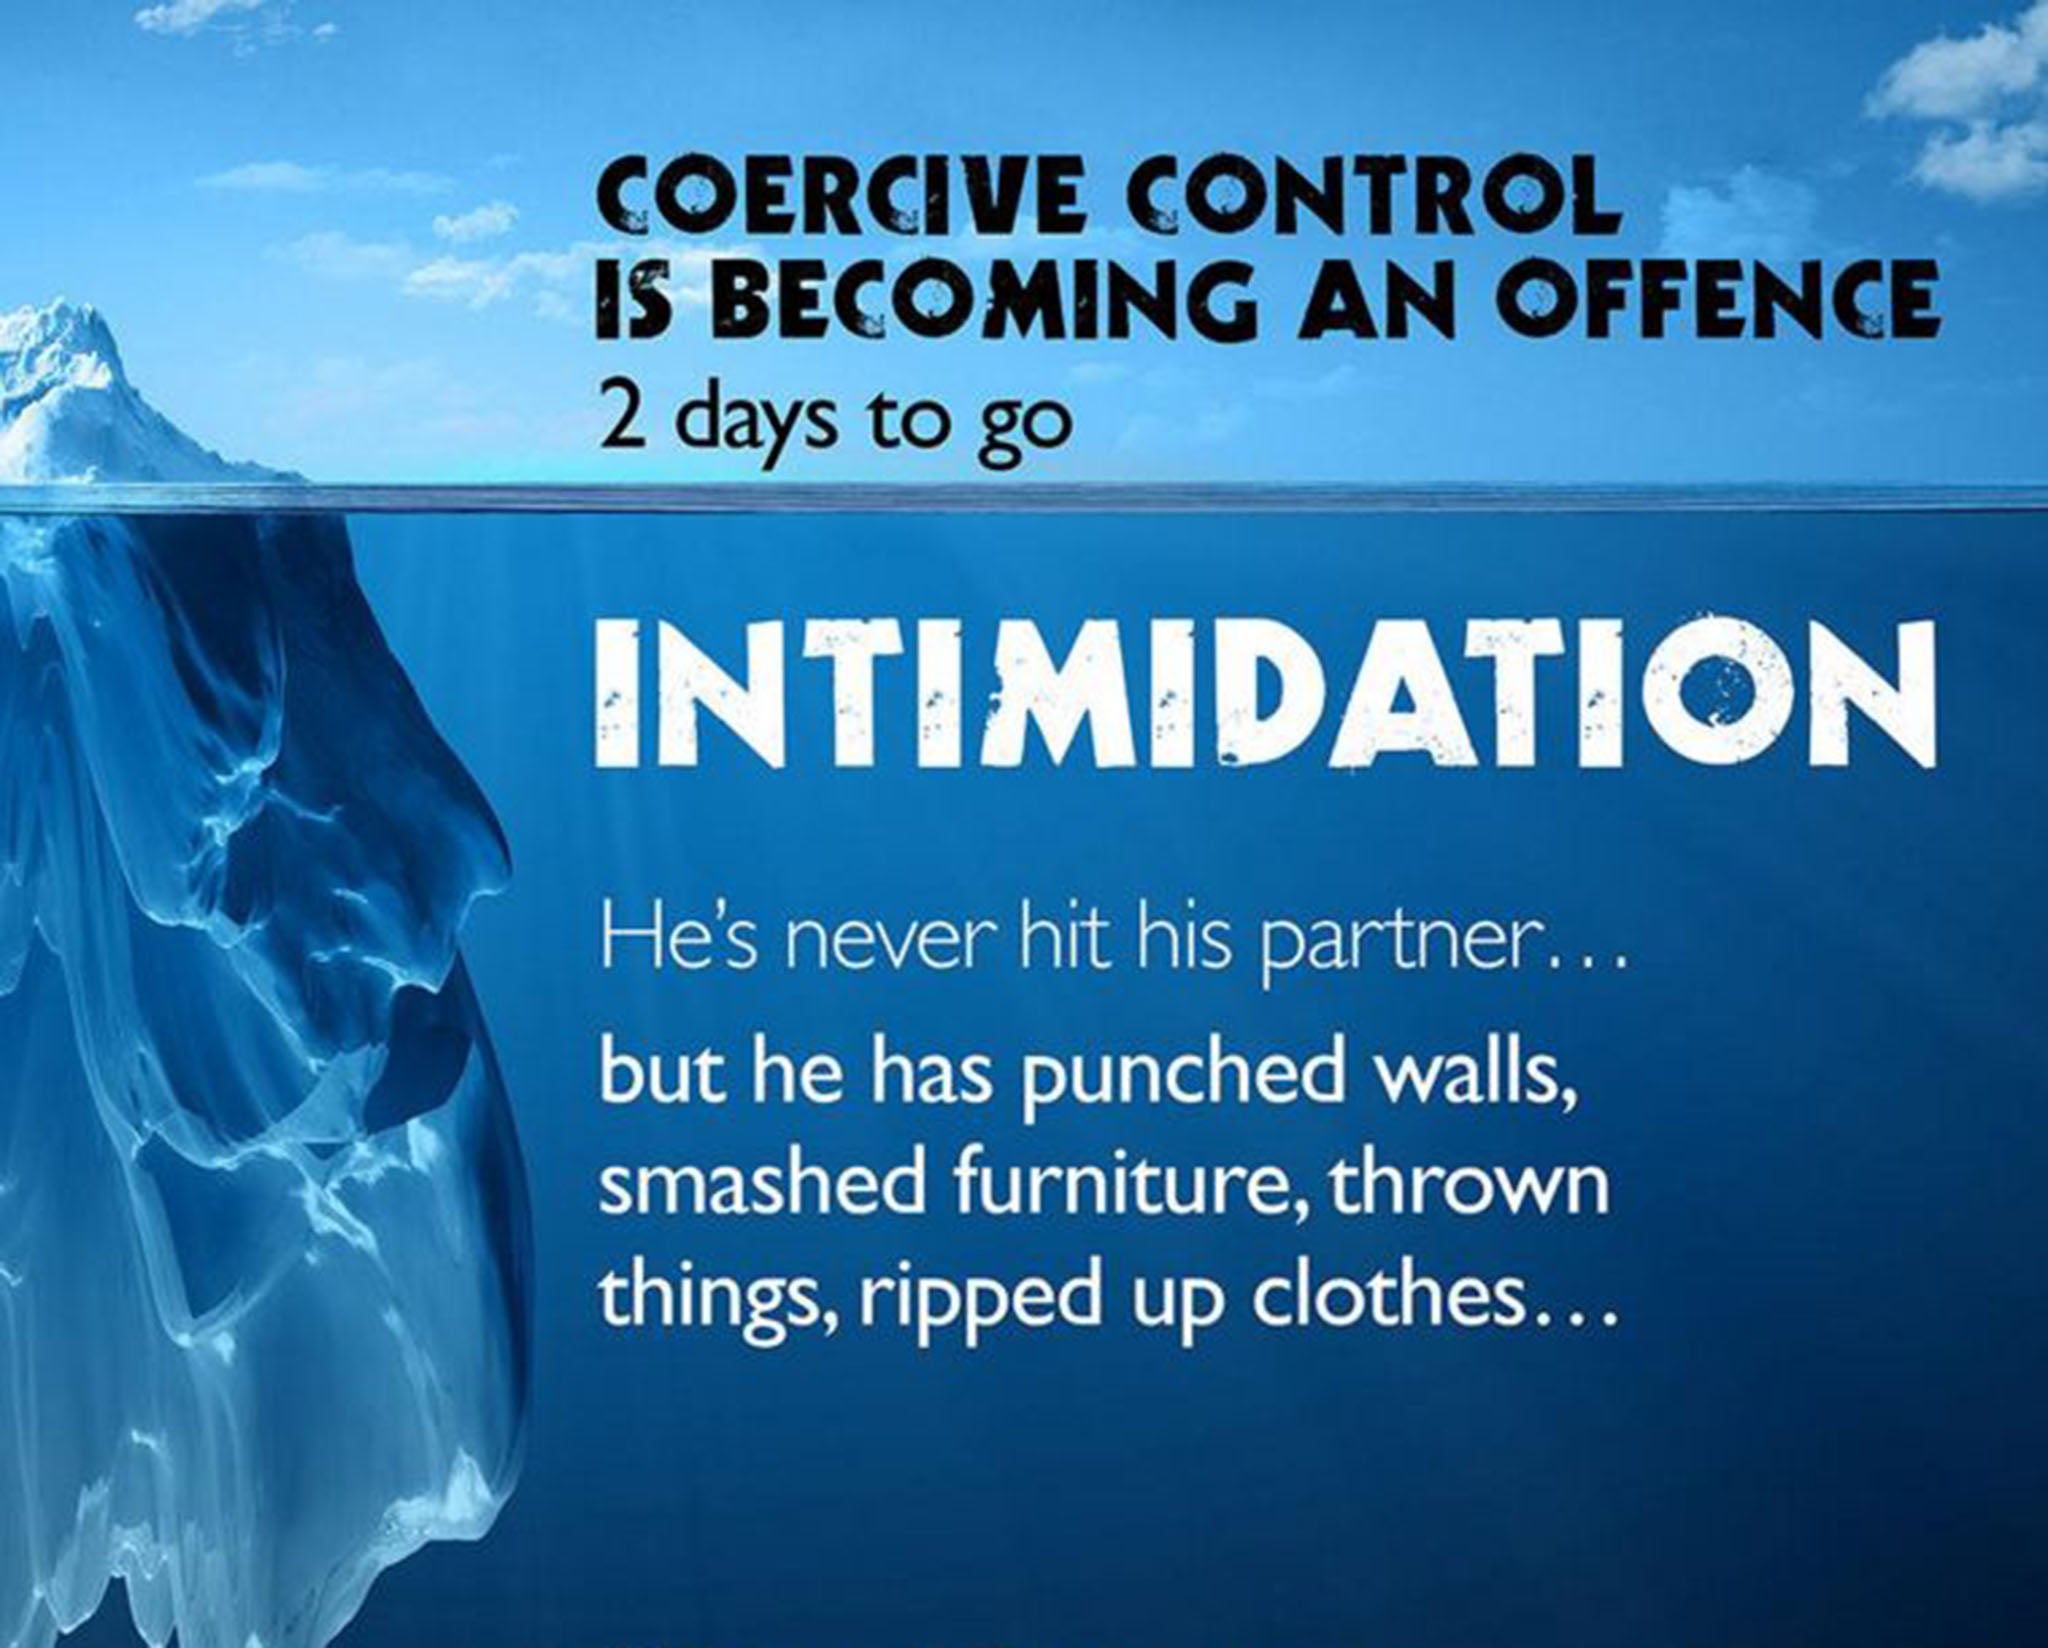 One of the posters released by Northumbria Police to promote the new coercive control law